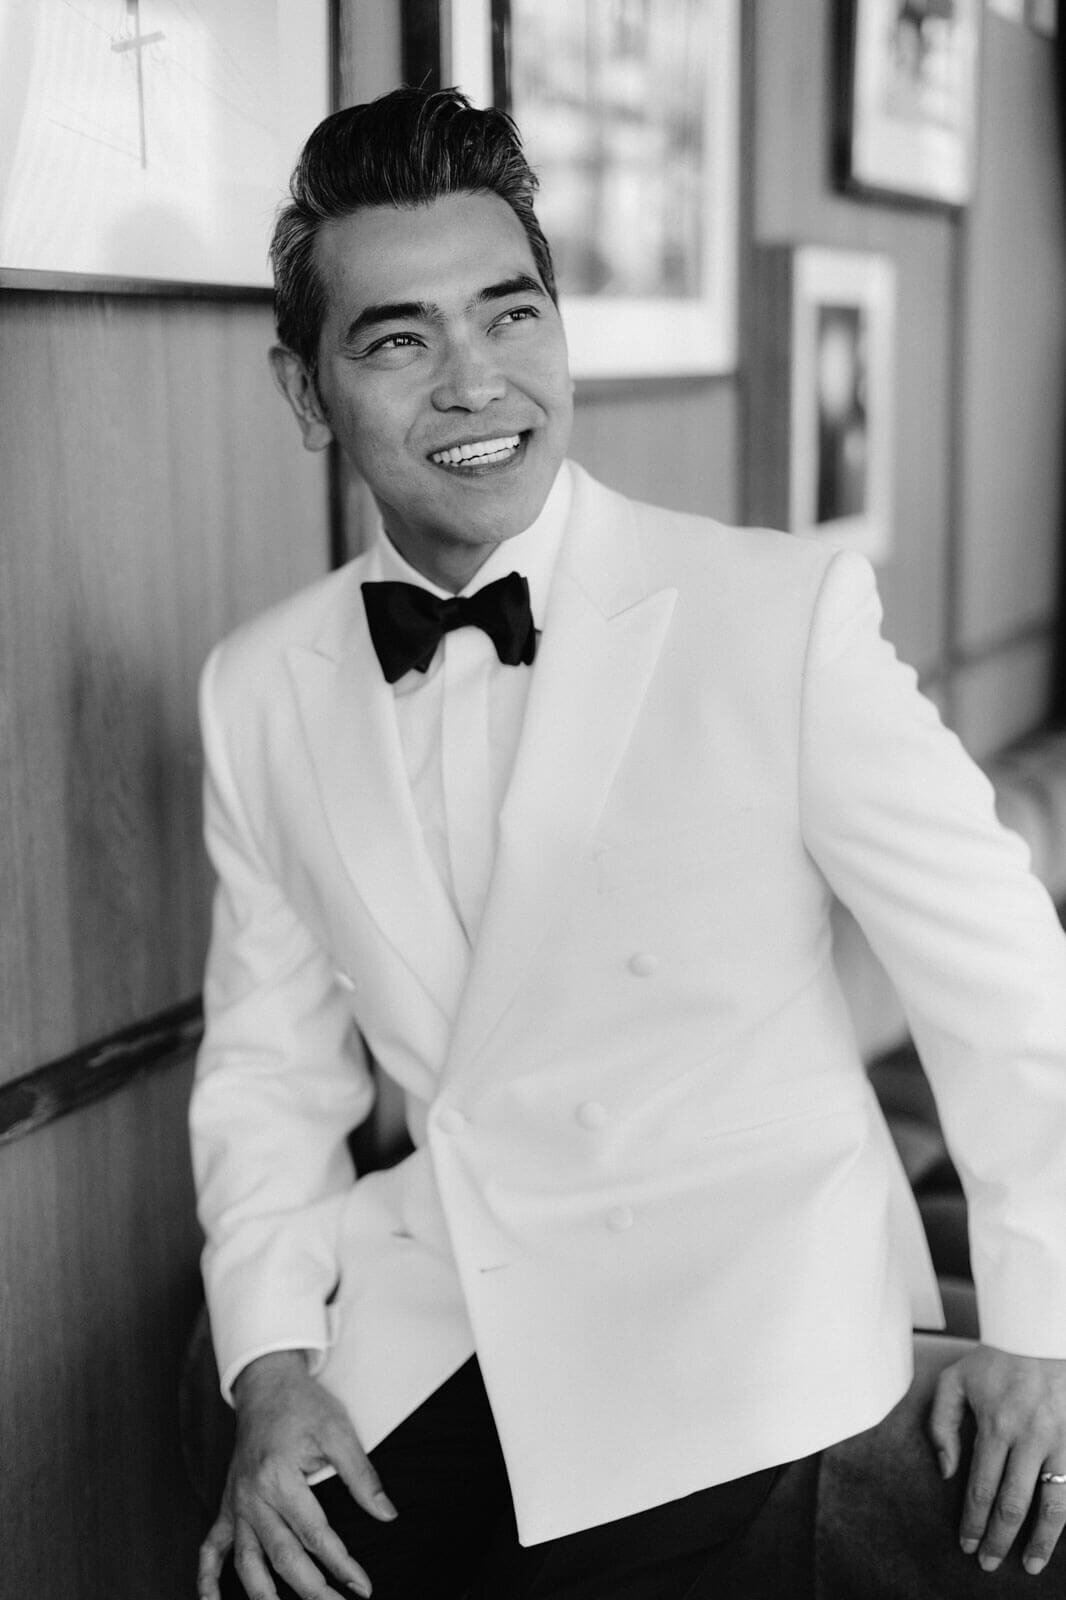 The groom, wearing a white suit, is smiling in The Skylark, New York. Wedding Image by Jenny Fu Studio